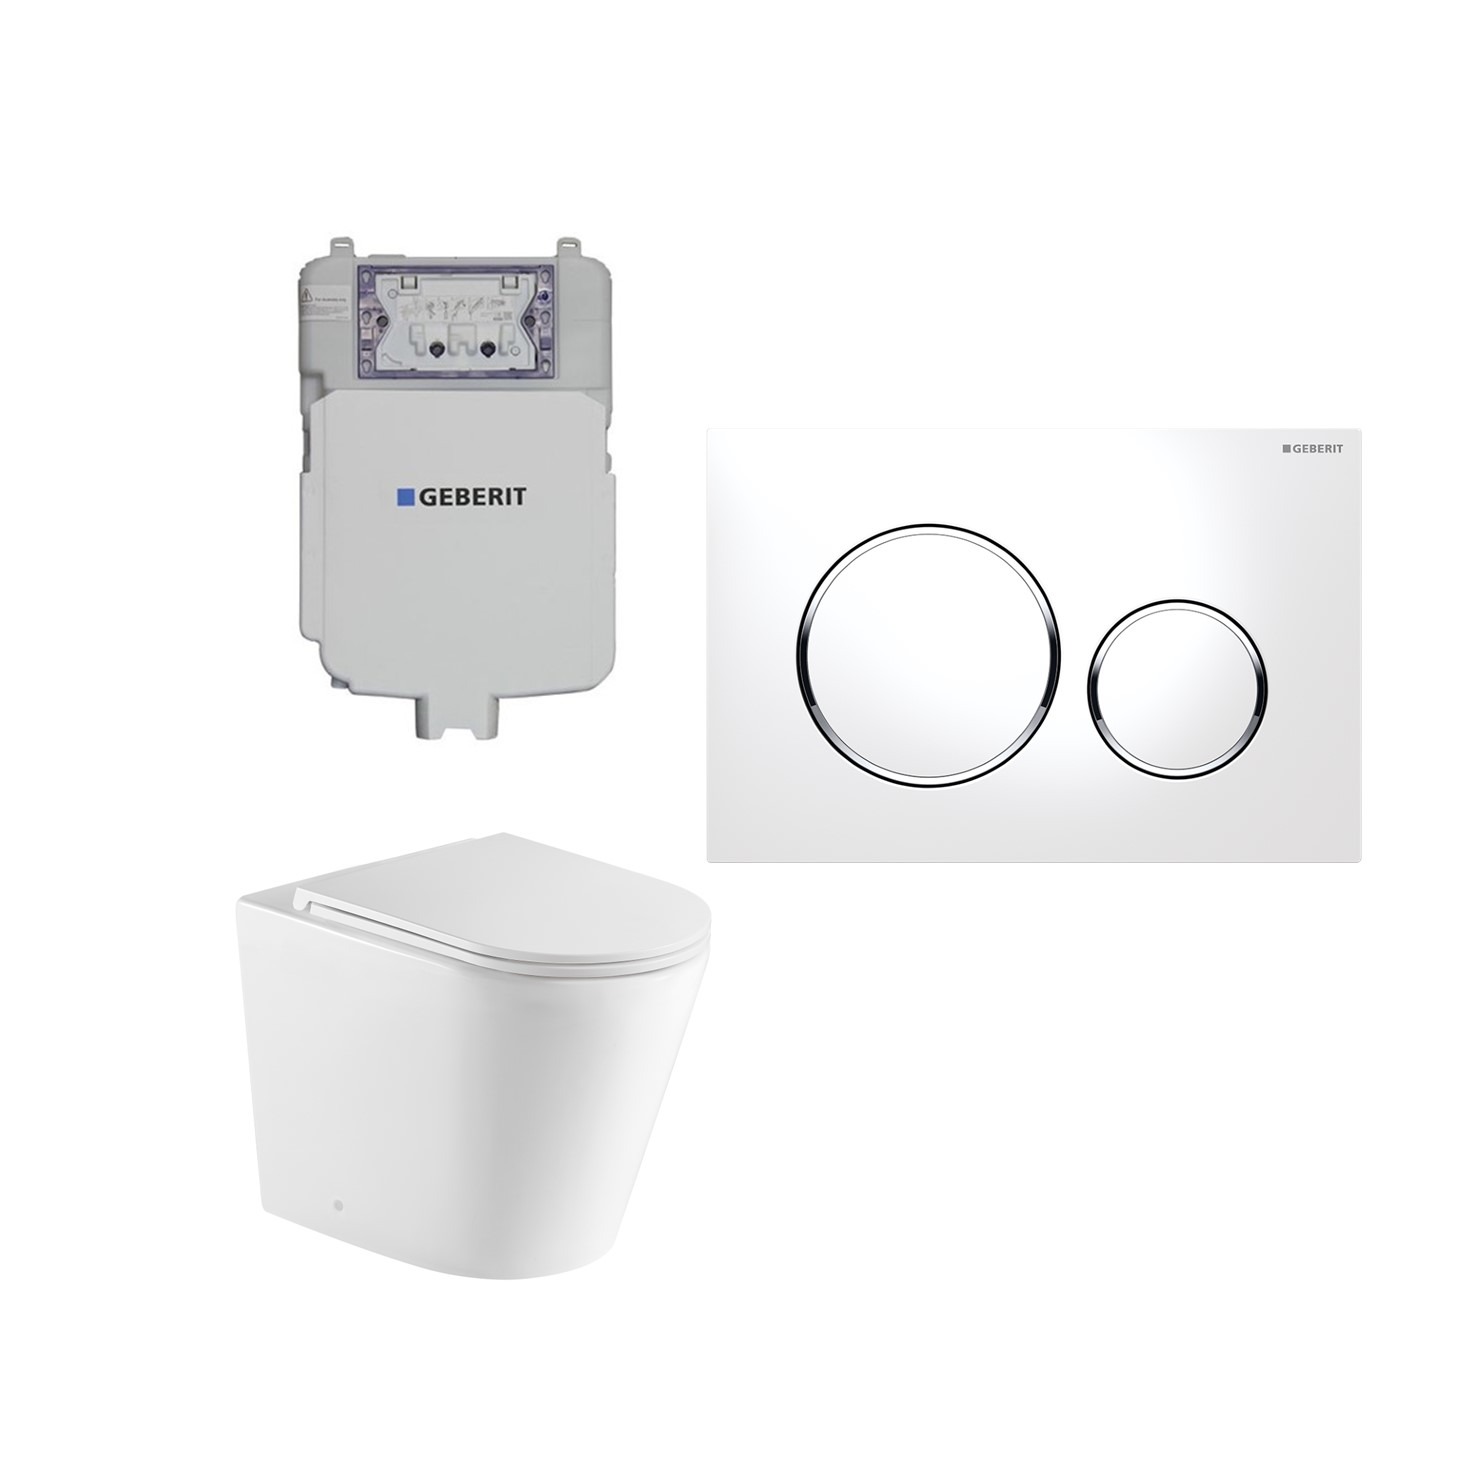 Geberit Sigma 8 Aluca Tornado Rimless In Wall Cistern Toilet Suite with White Button Chrome Trim